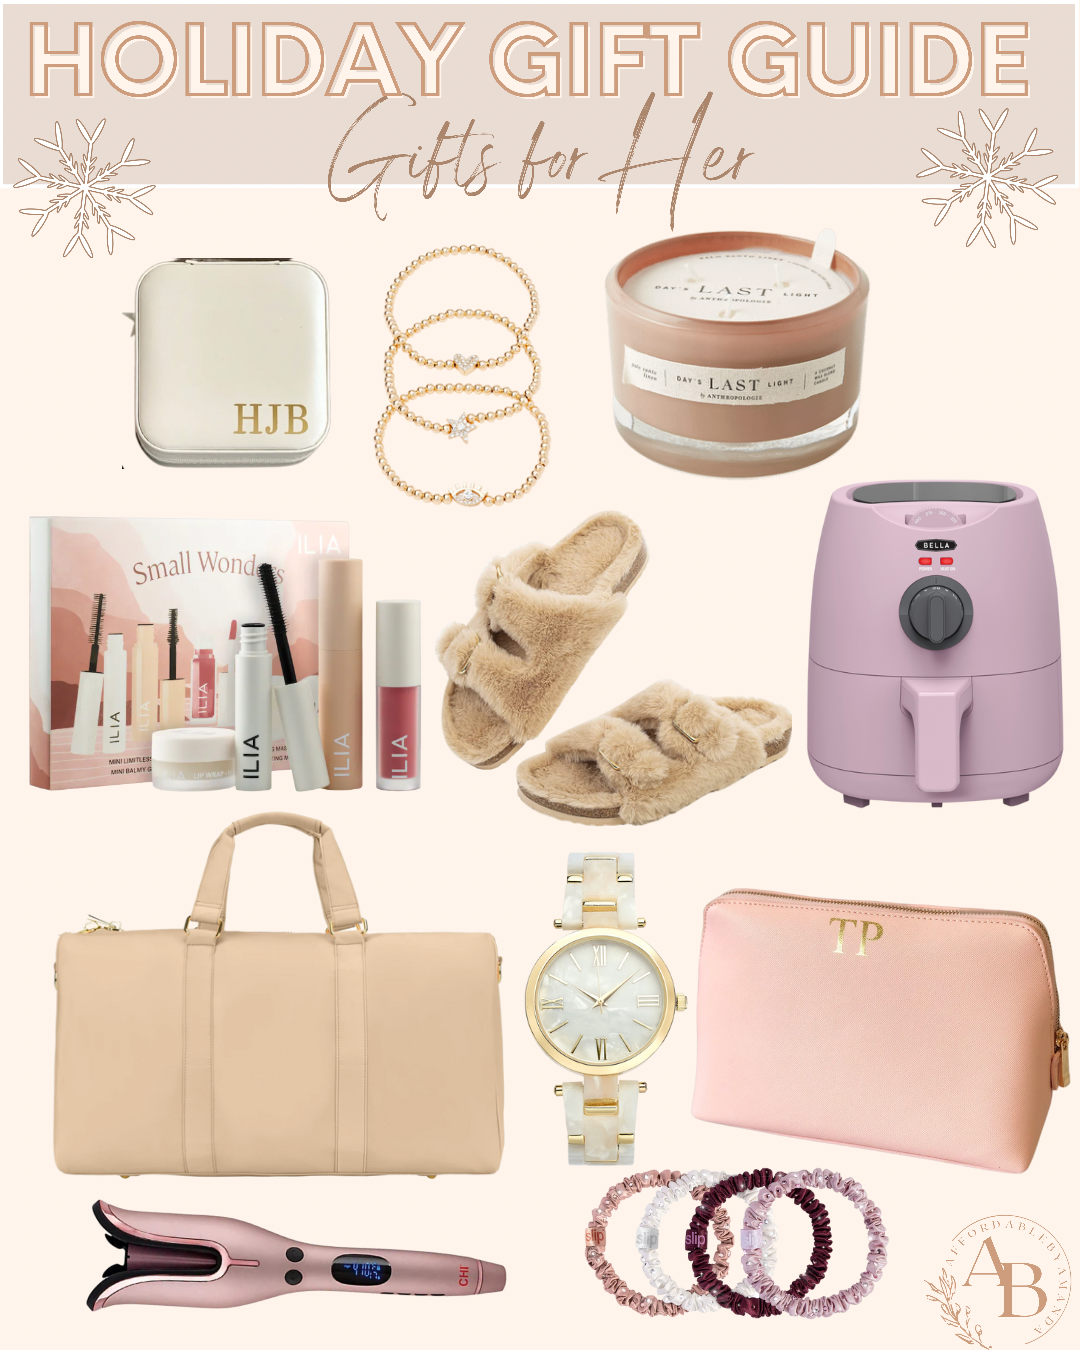 Top 10 Christmas Presents for Her. Inexpensive Gifts for the Woman Who Has Everything. Holiday Gift Guide for Her.